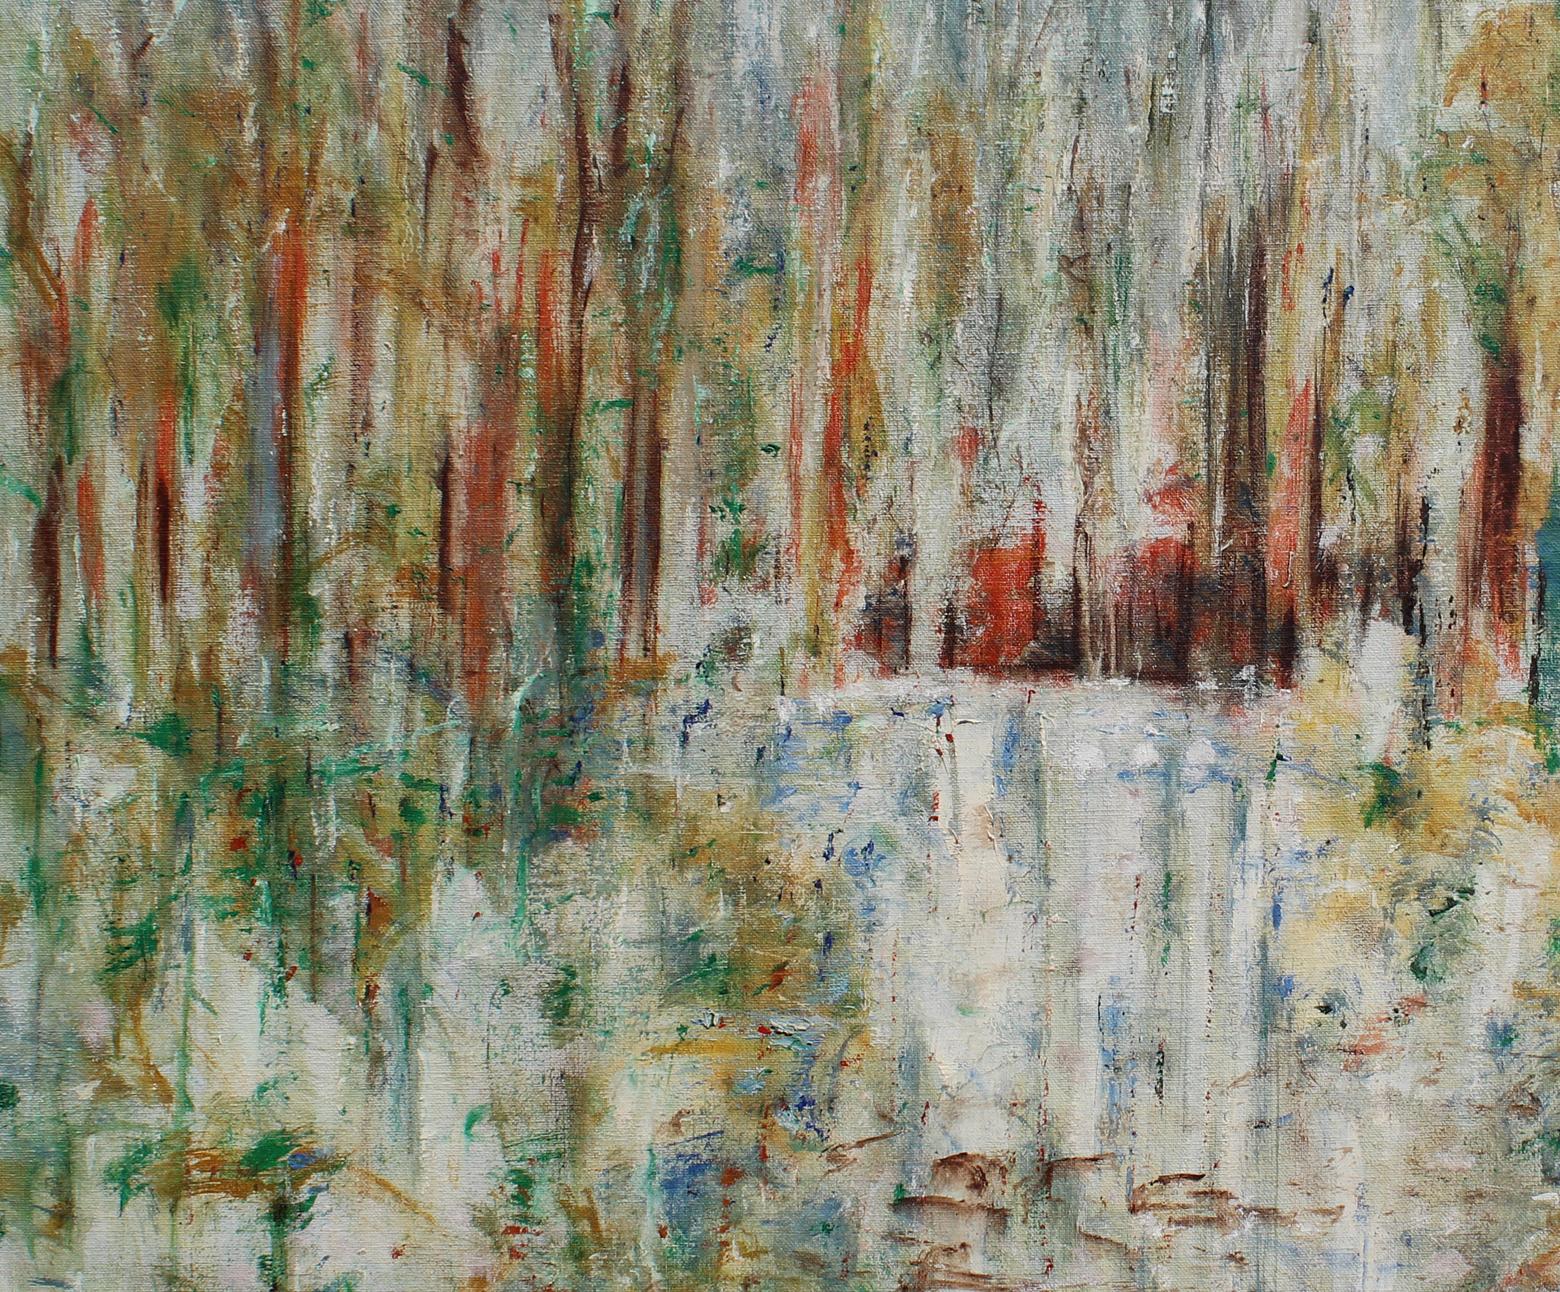 Landscape, New York - Abstract Expressionist Painting by Arthur Pinajian